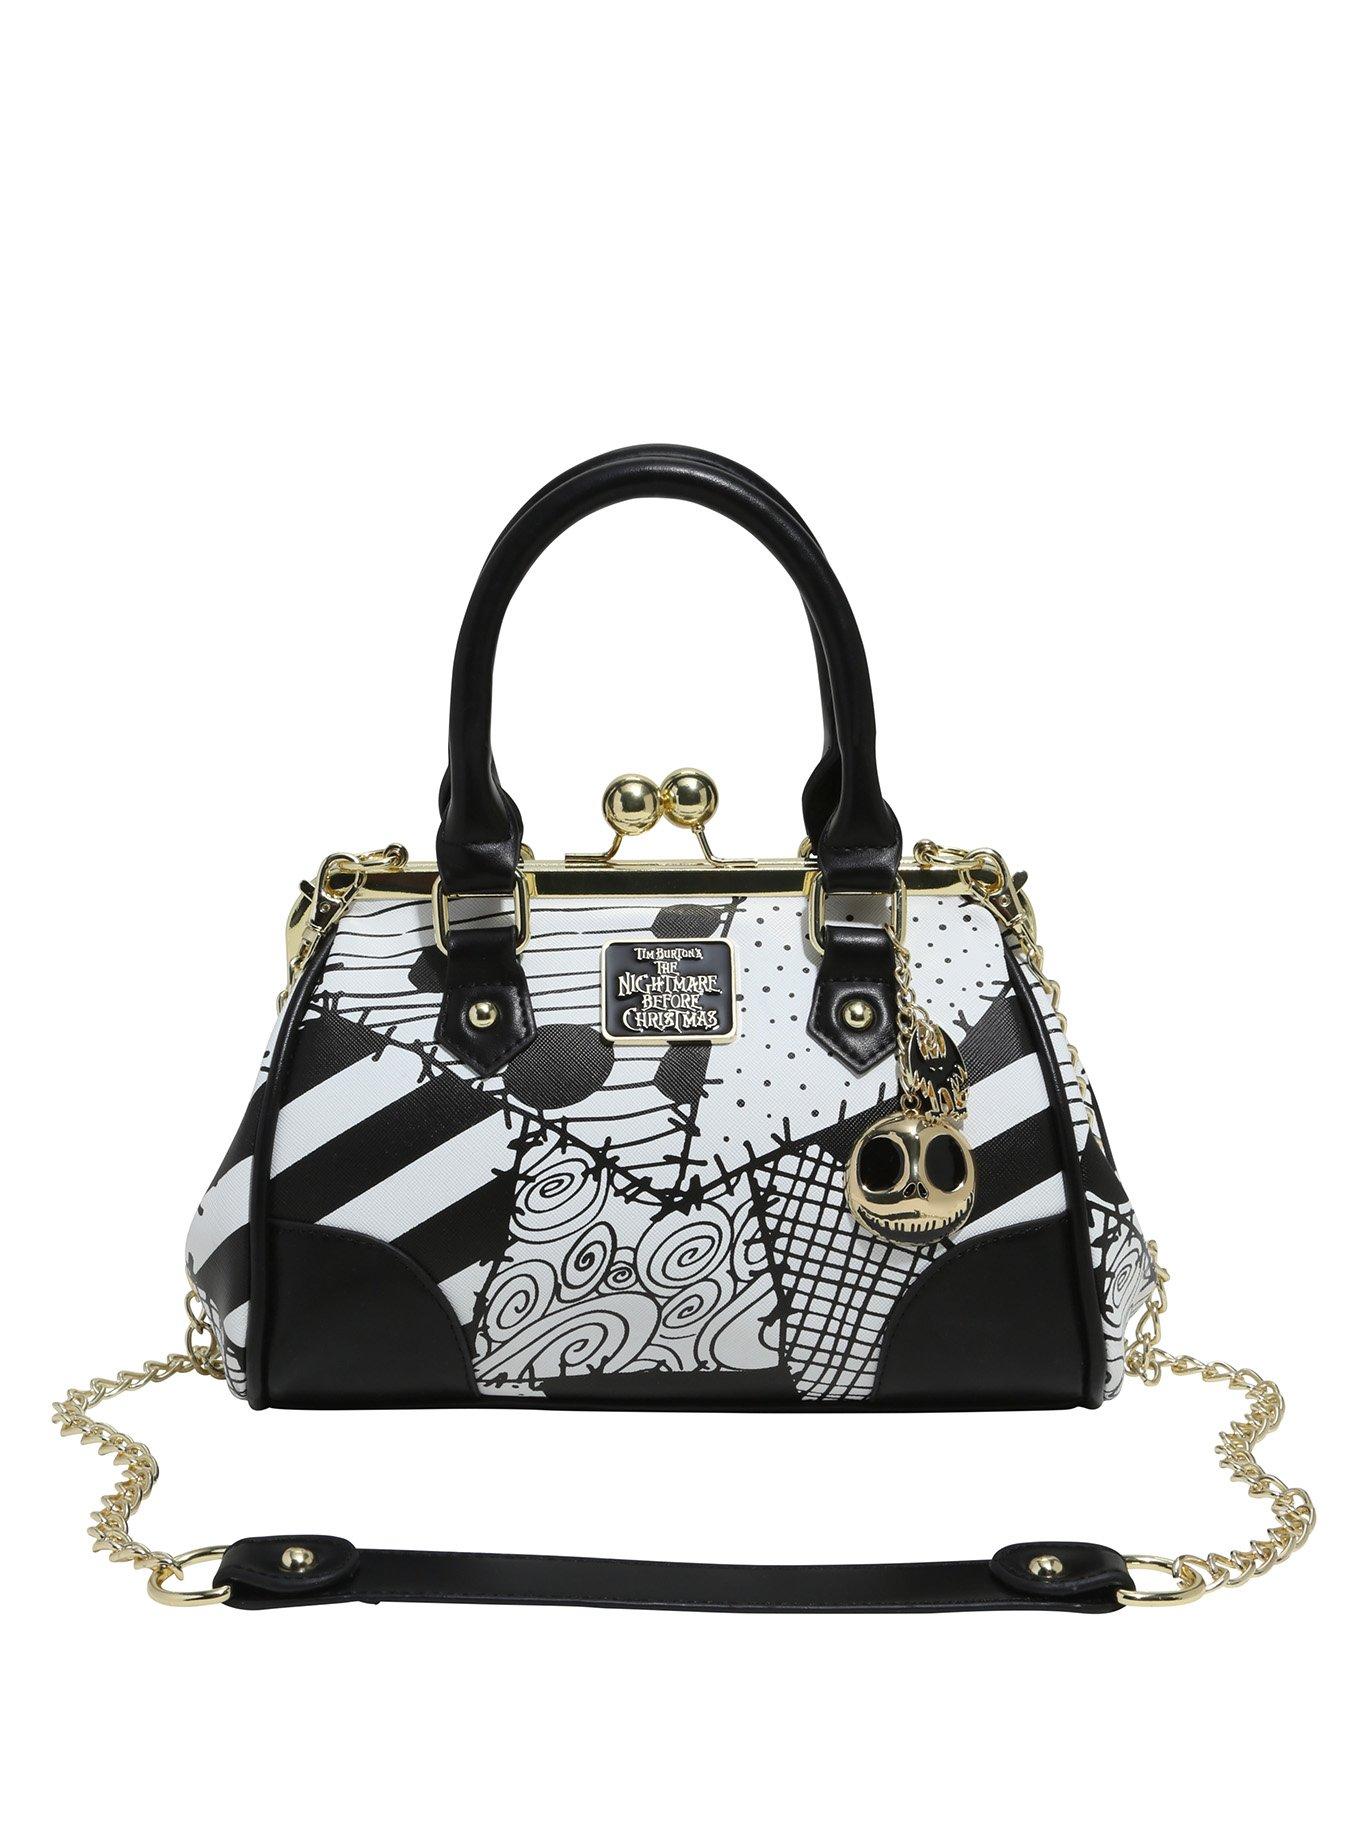 The Nightmare Before Christmas Patchwork Kisslock Satchel | Hot Topic